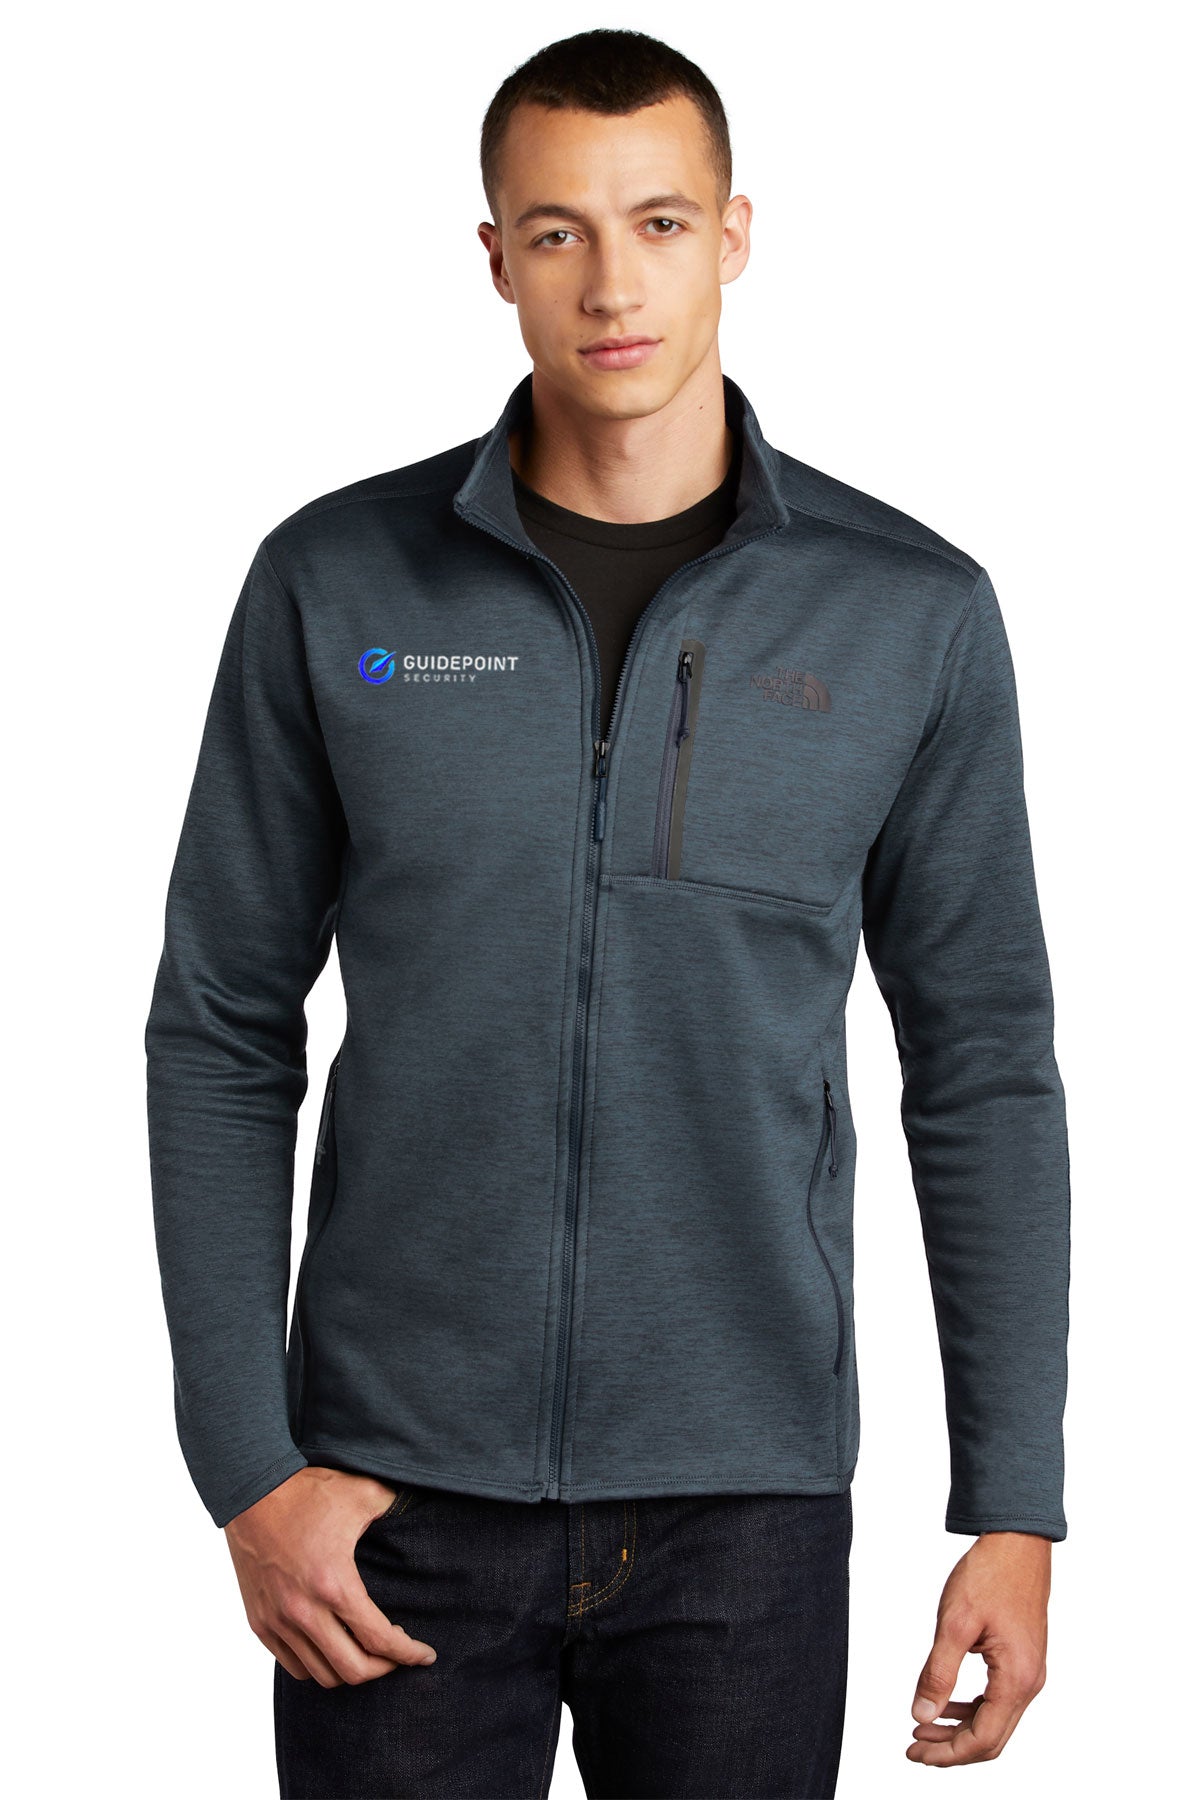 The North Face Skyline Full-Zip Fleece Jacket Urban Navy Heather [GuidePoint Security]